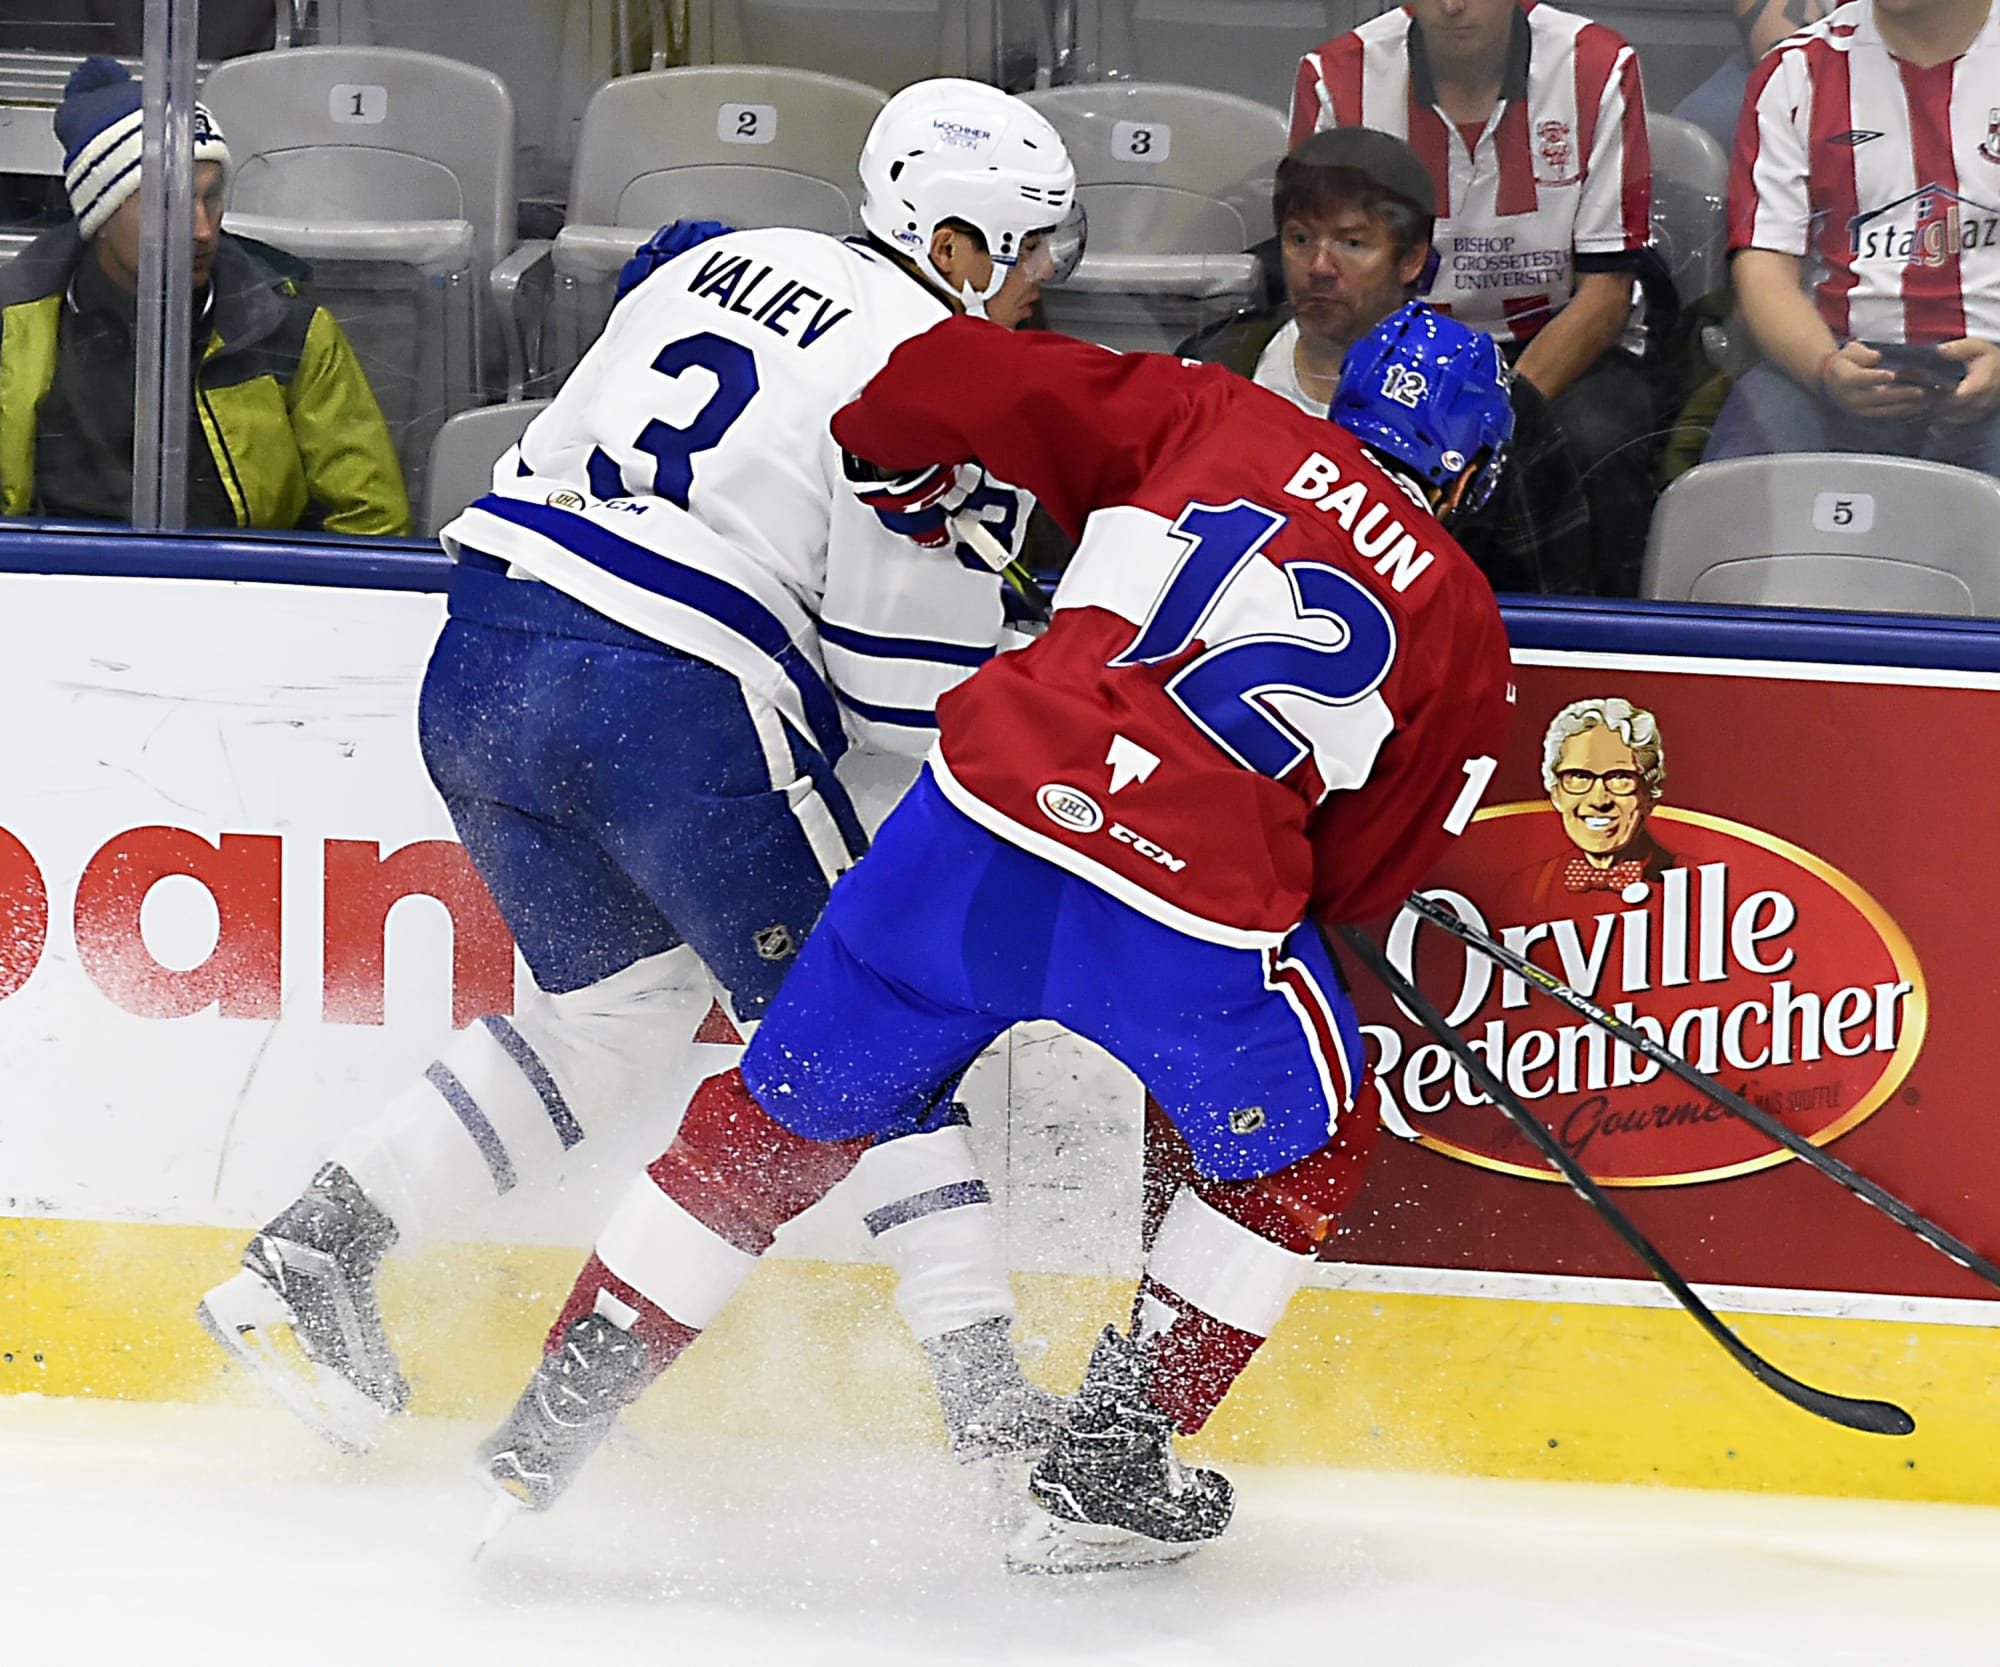 Montreal Canadiens: Rinat Valiev and Kerby Rychel could play right now